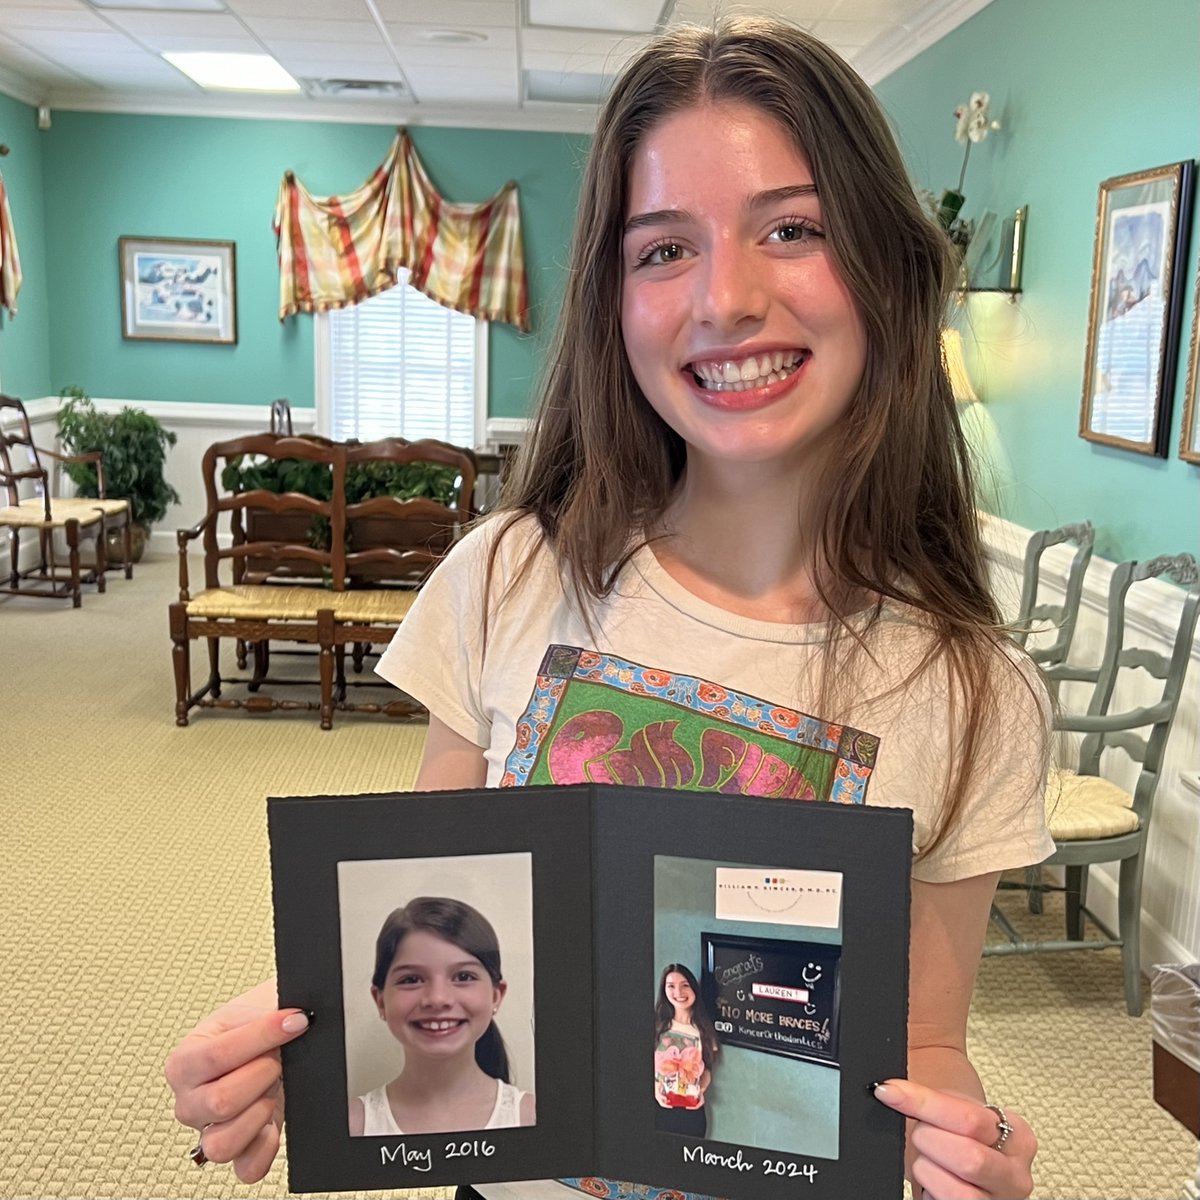 YAY!!! Congratulations to Lauren! After TWO phases of orthodontic treatment, she's DONE! We love your smile and will miss see you at the office! #KincerOrthodontics #ByeByeBraces #Congratulations